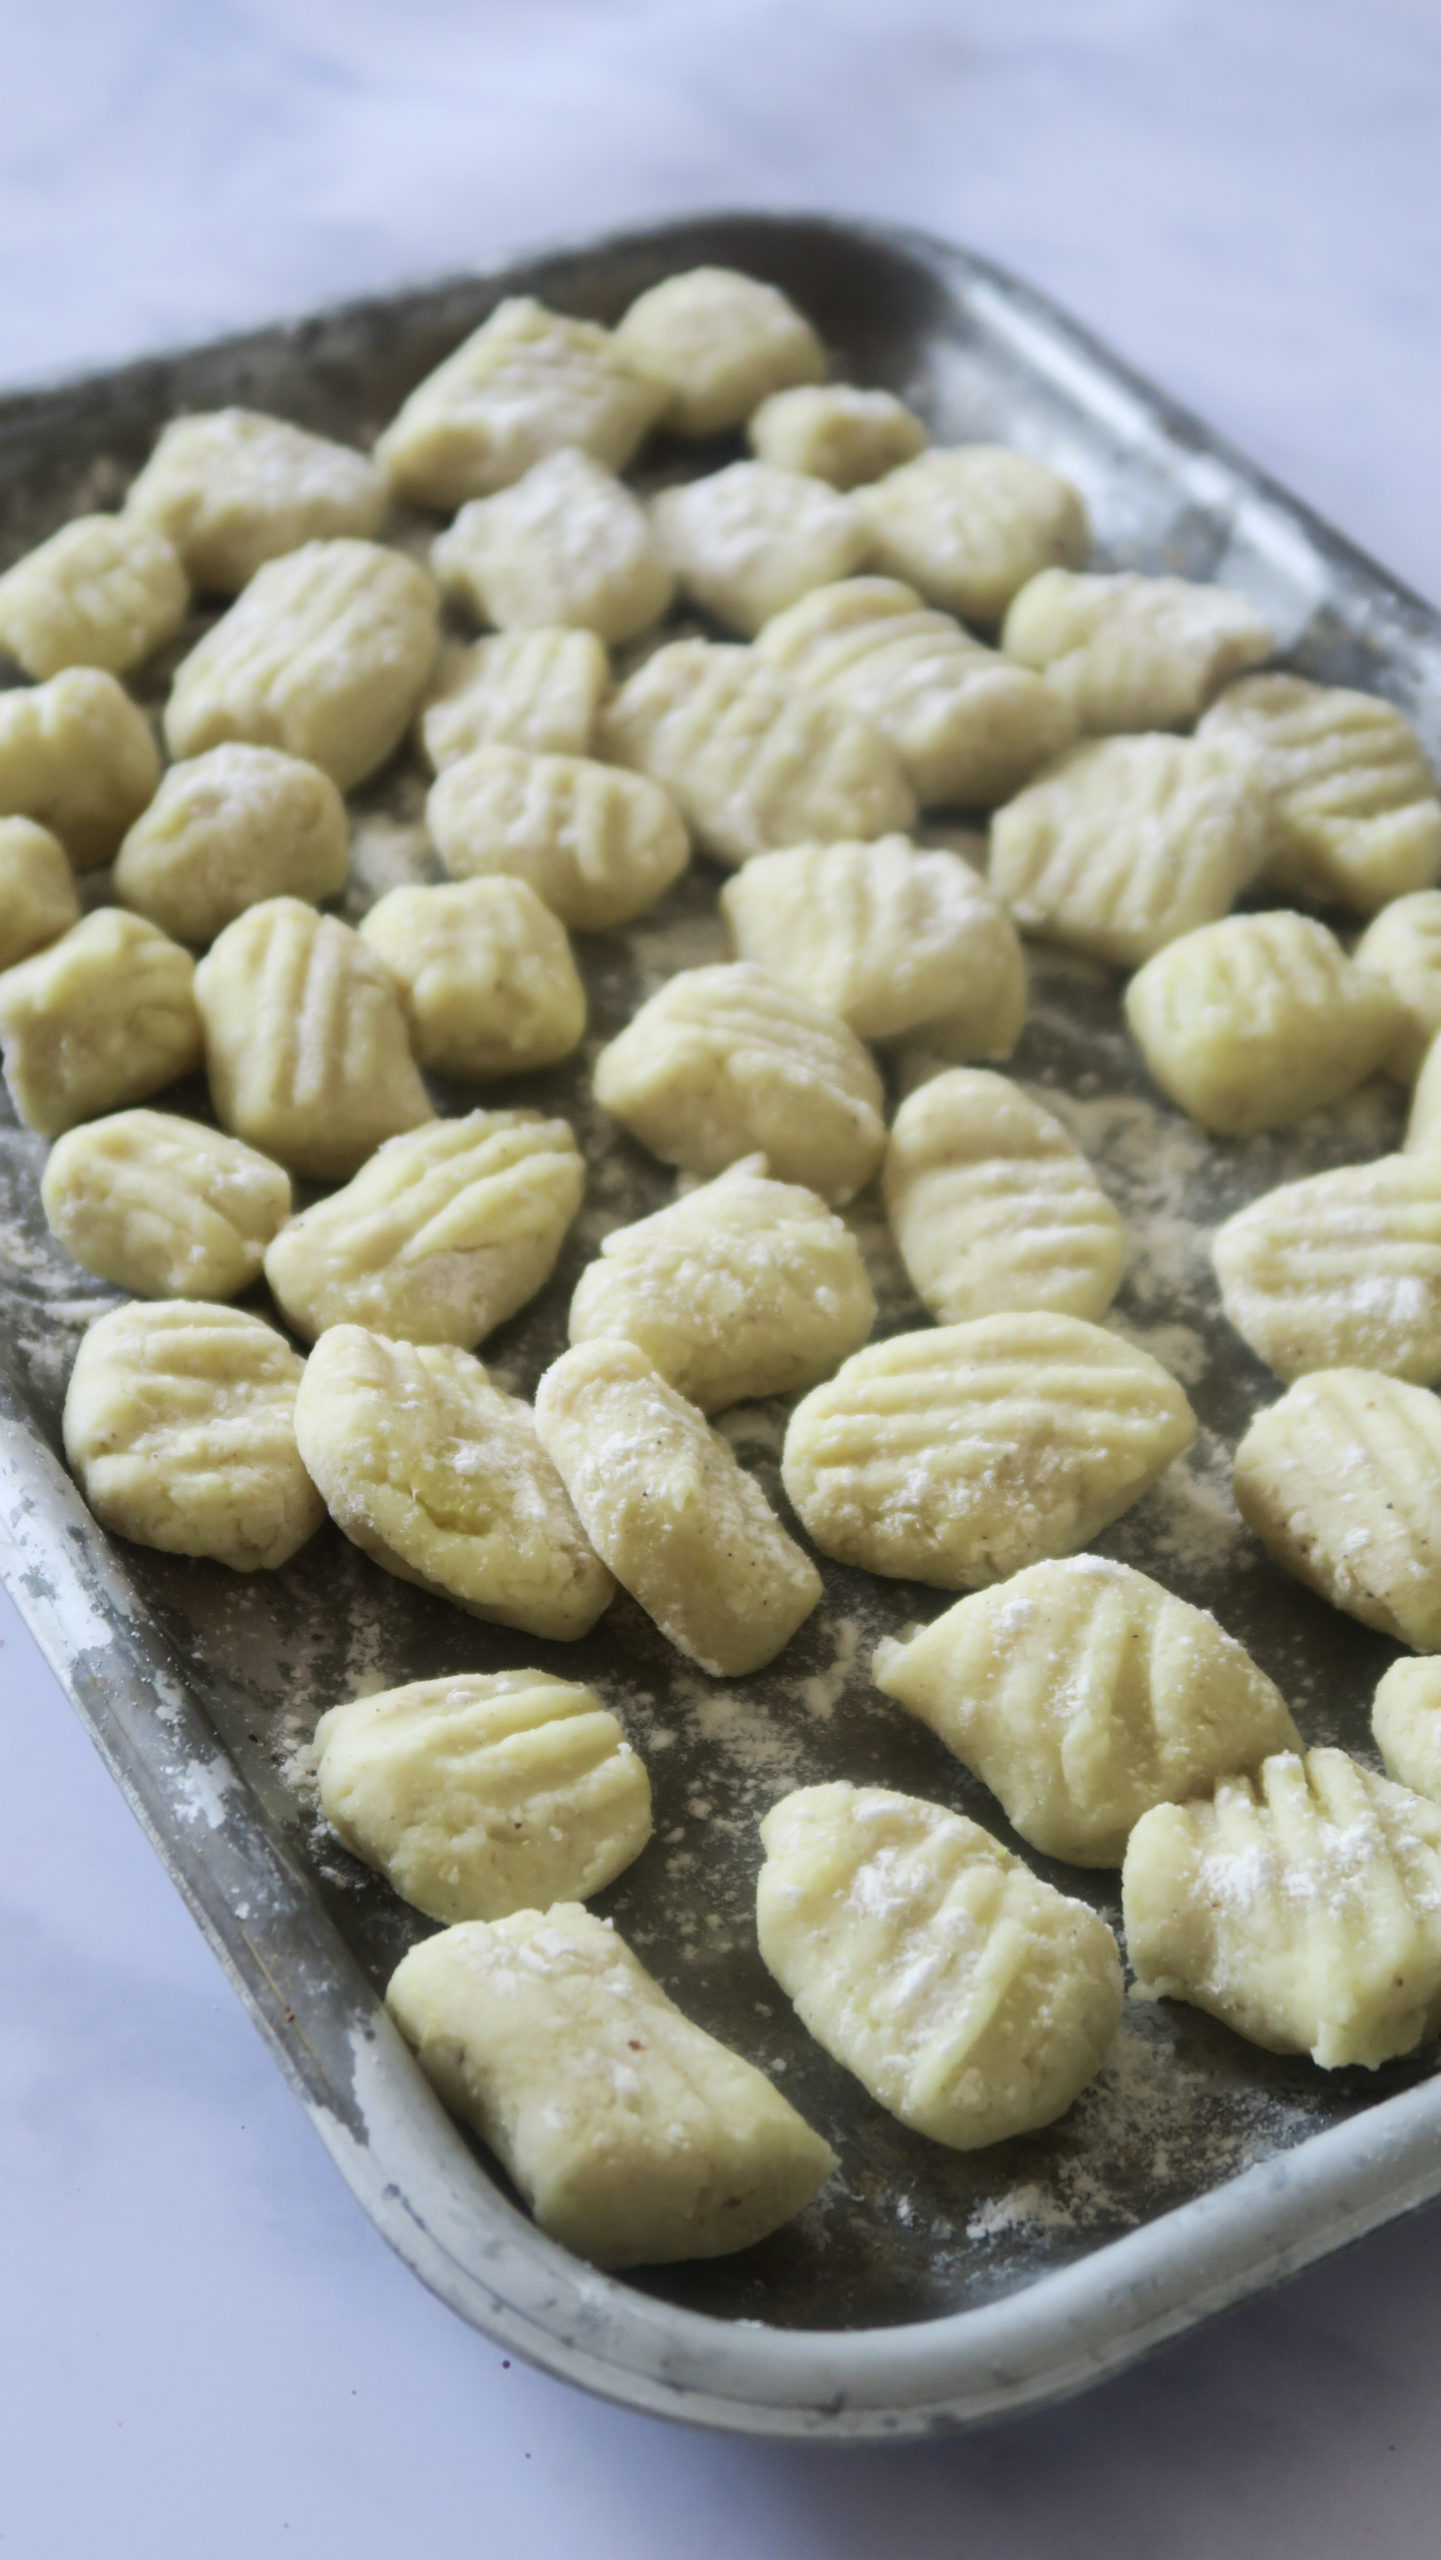 Silver tray with gnocchi before cooking